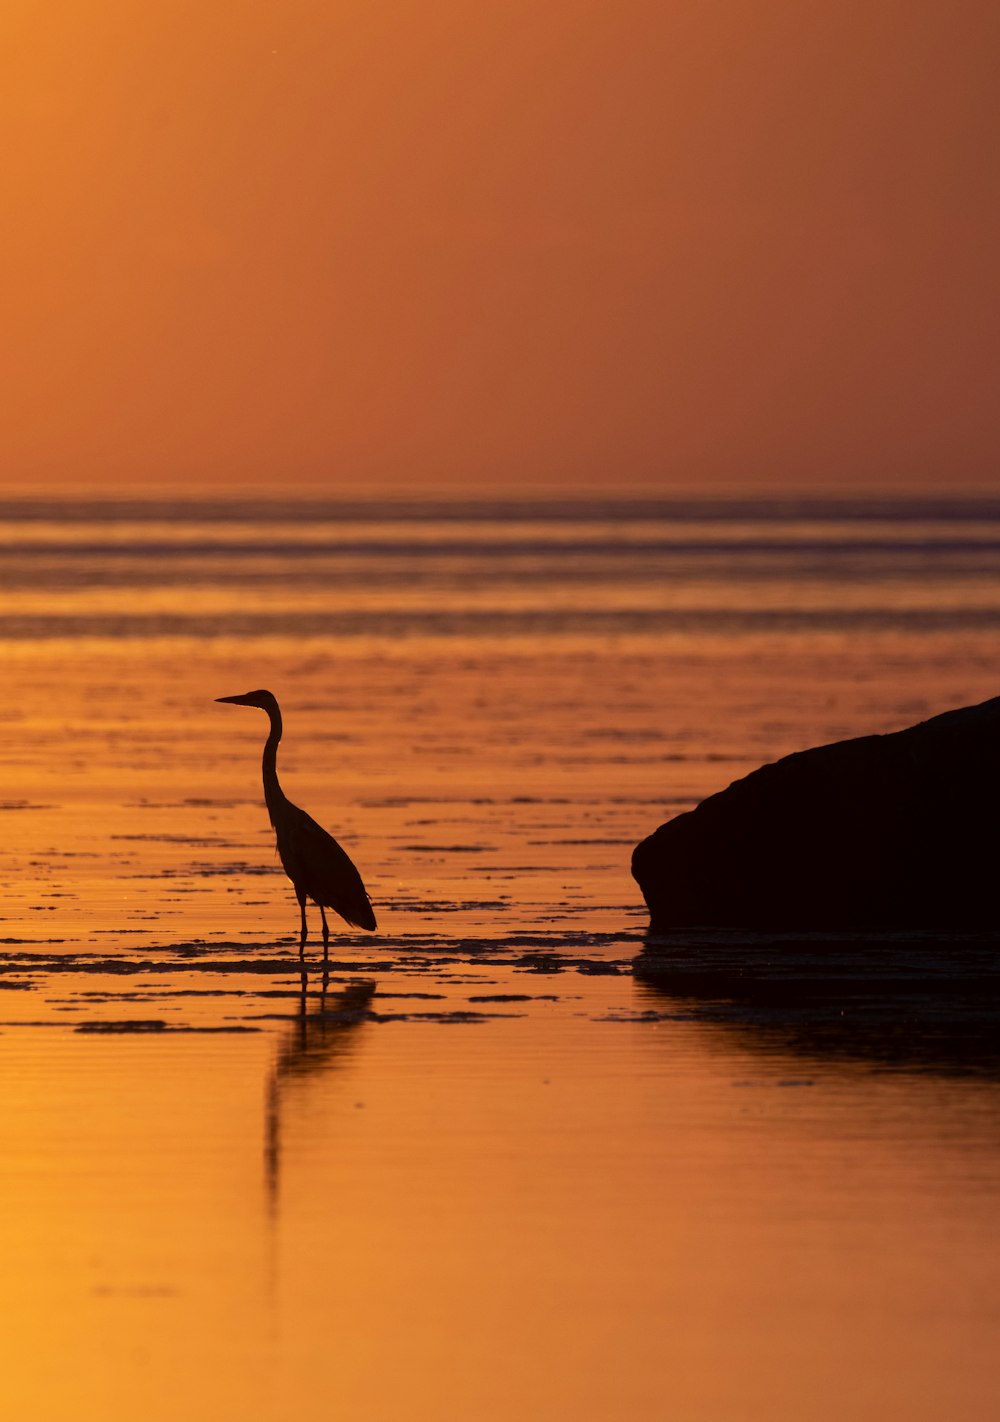 silhouette of bird on rock formation near body of water during sunset